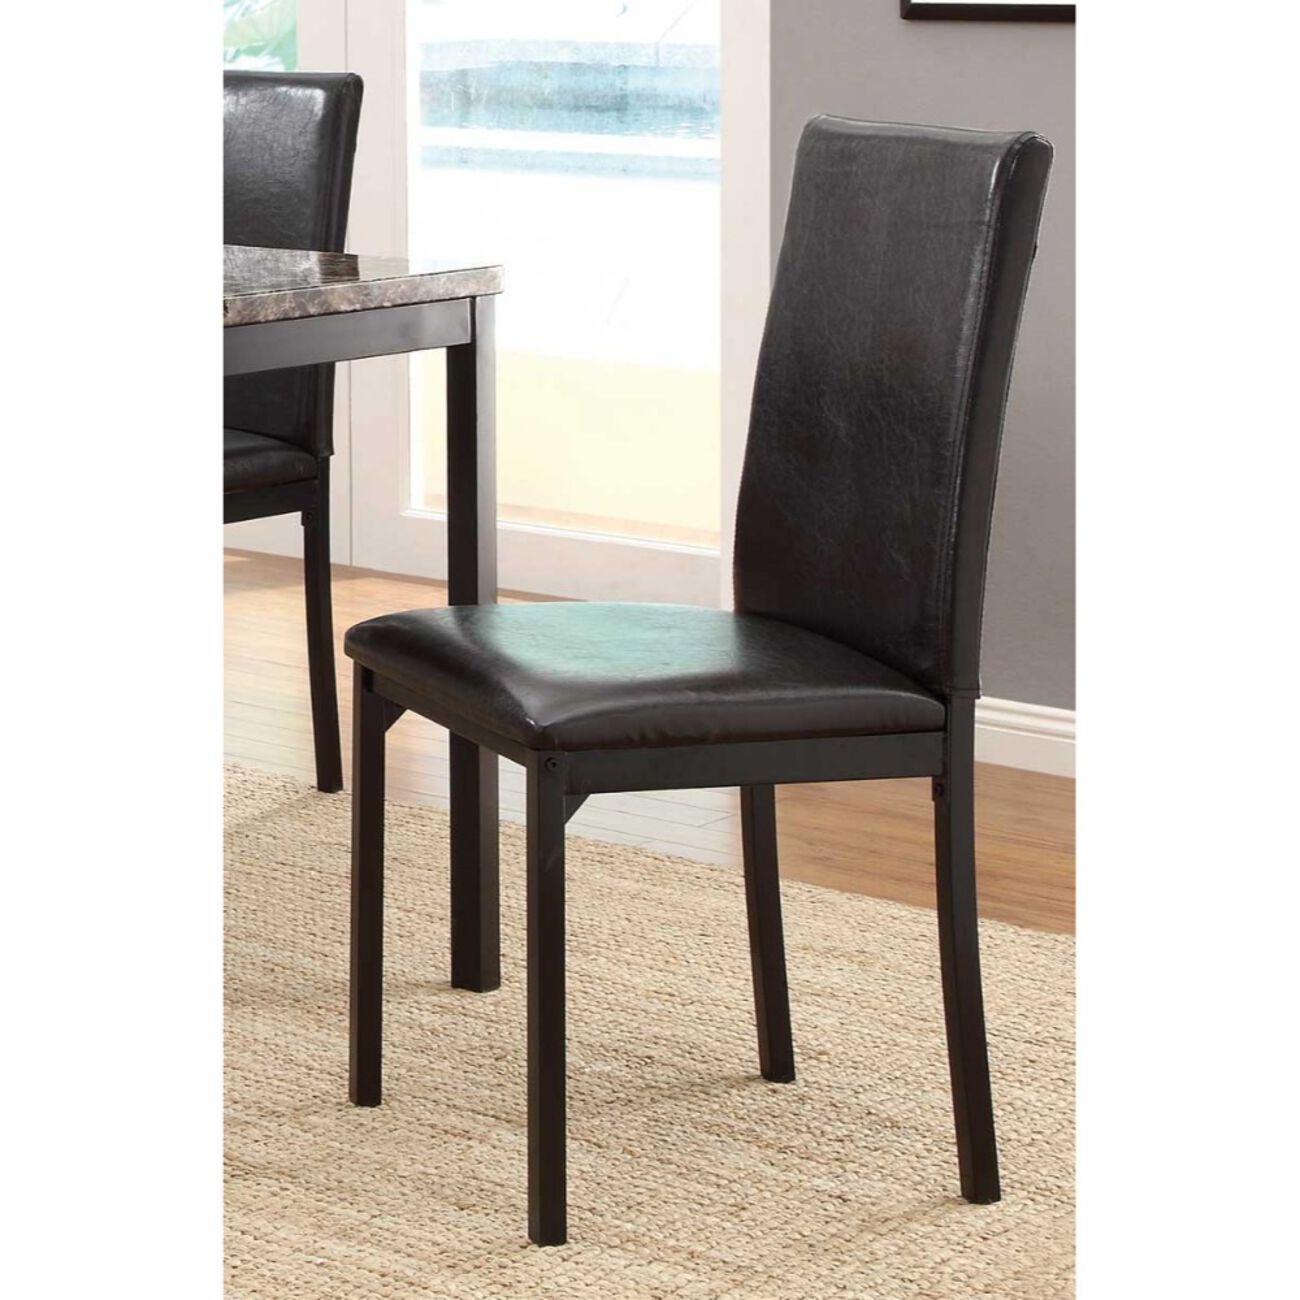 Leatherette Upholstered Counter Height Metal Frame Side Chair, Dark Brown (Set of 4)